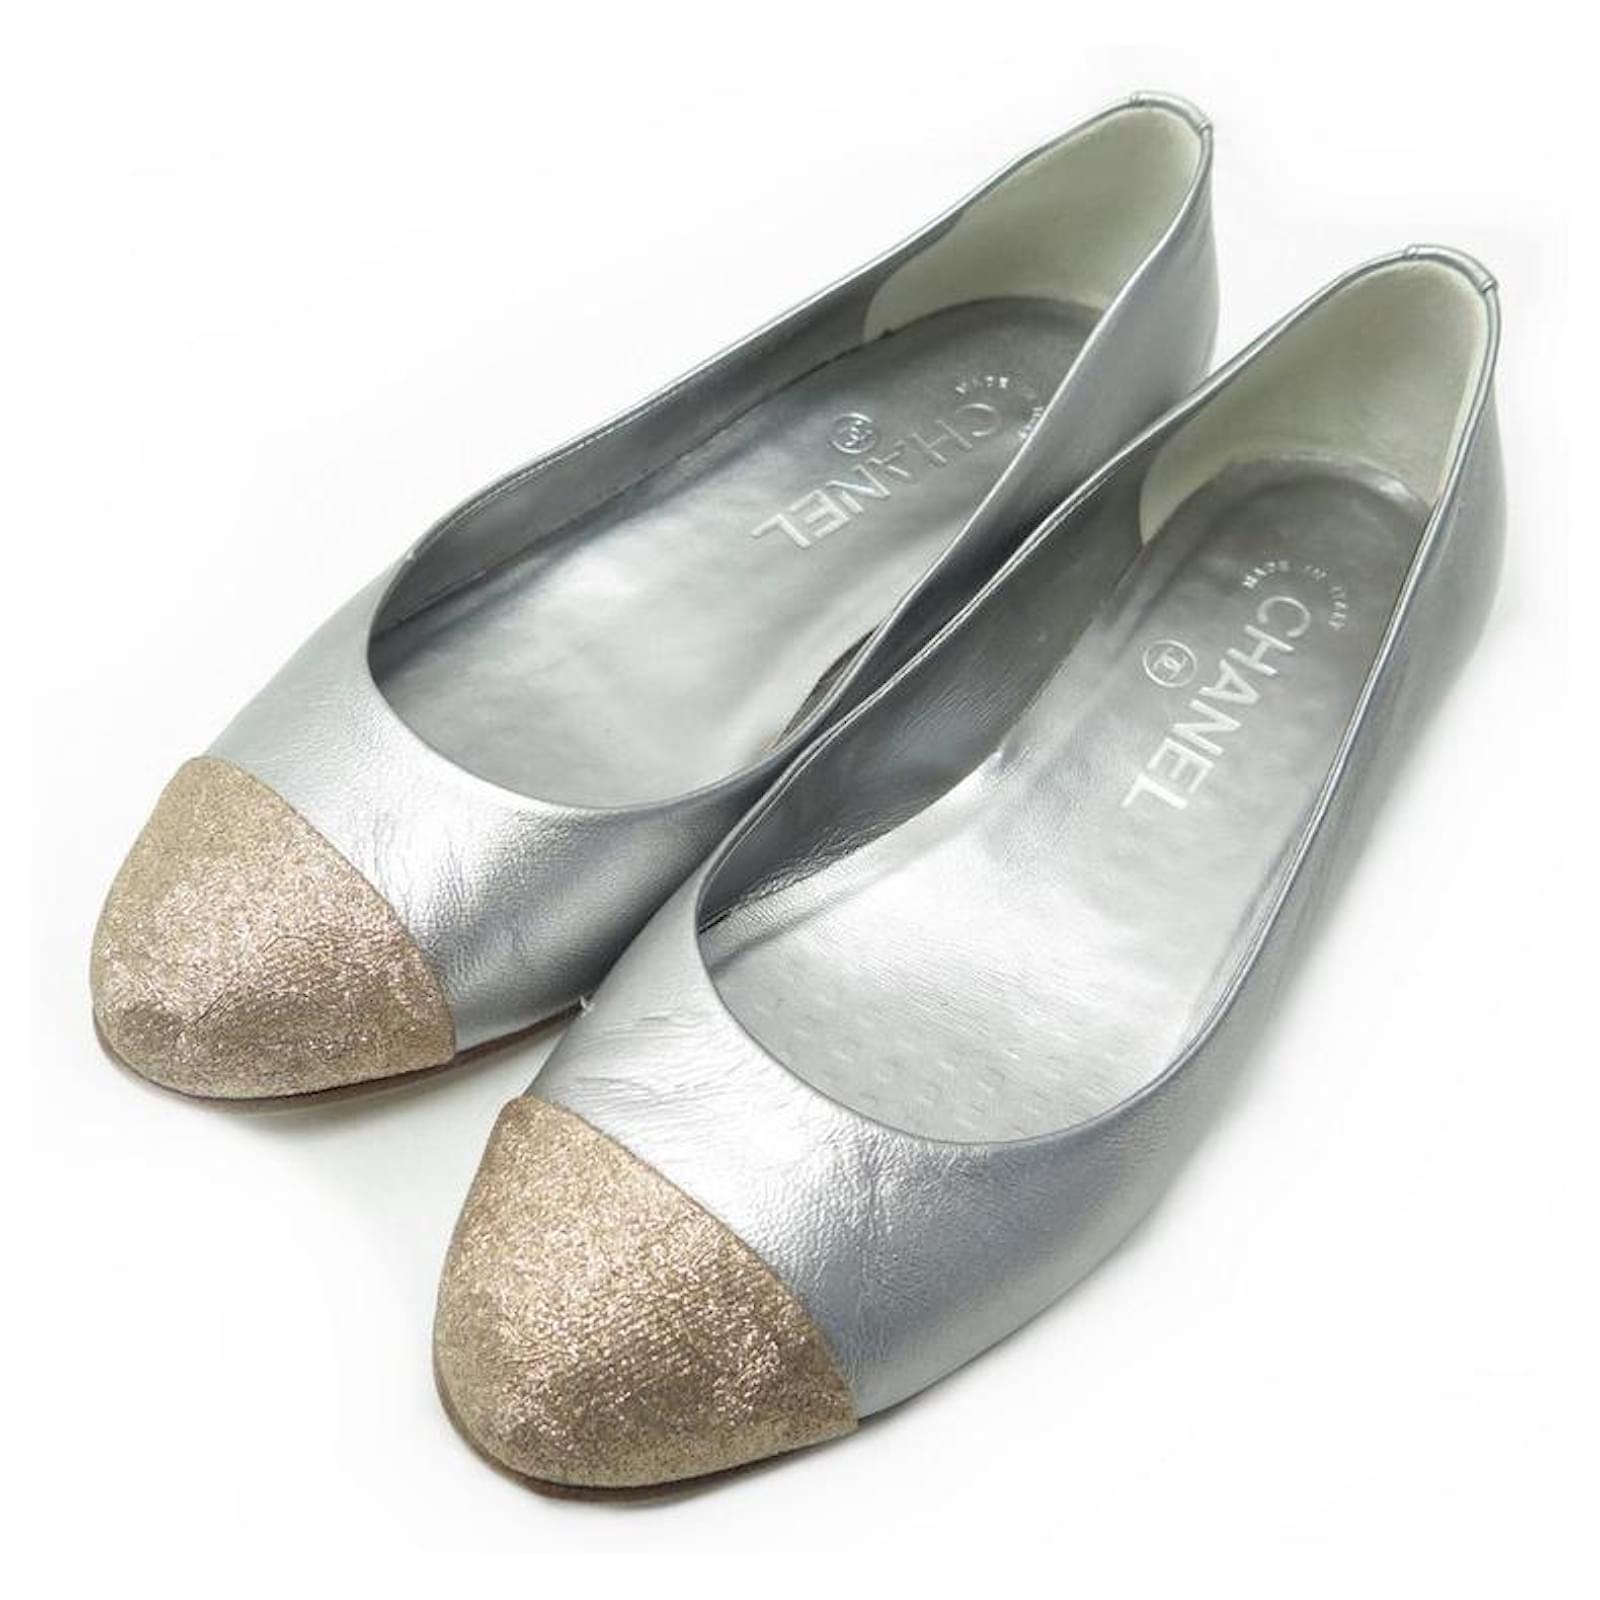 CHANEL SHOES BALLERINAS G23536 36.5 TWO-TONE LEATHER SILVER & GOLD